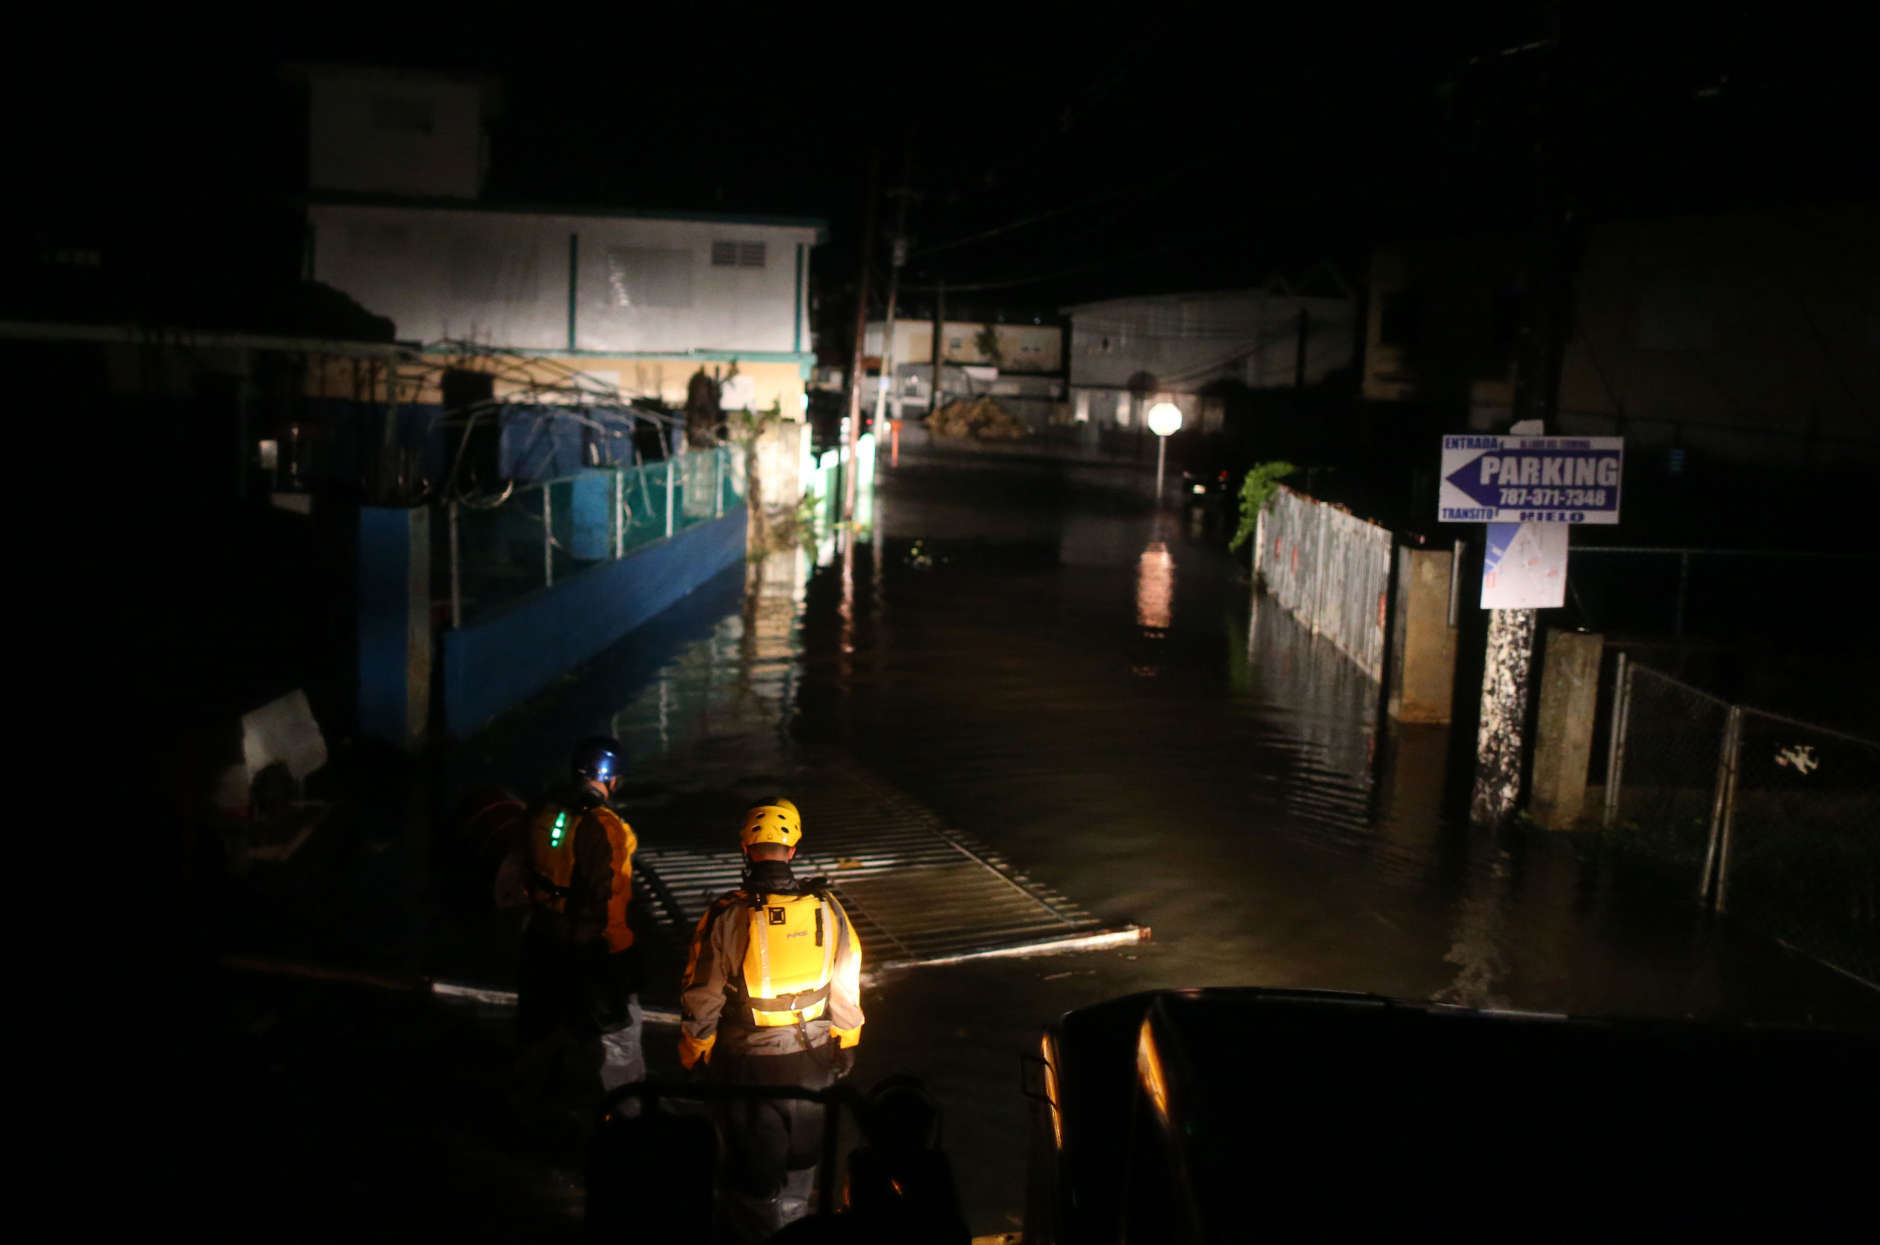 FAJARDO, PUERTO RICO - SEPTEMBER 06: A rescue team from the local emergency management agency inspects flooded areas after the passing of Hurricane Irma on September 6, 2017 in Fajardo, Puerto Rico. The category 5 storm is expected to pass over Puerto Rico and the Virgin Islands today, and make landfall in Florida by the weekend. (Photo by Jose Jimenez/Getty Images)